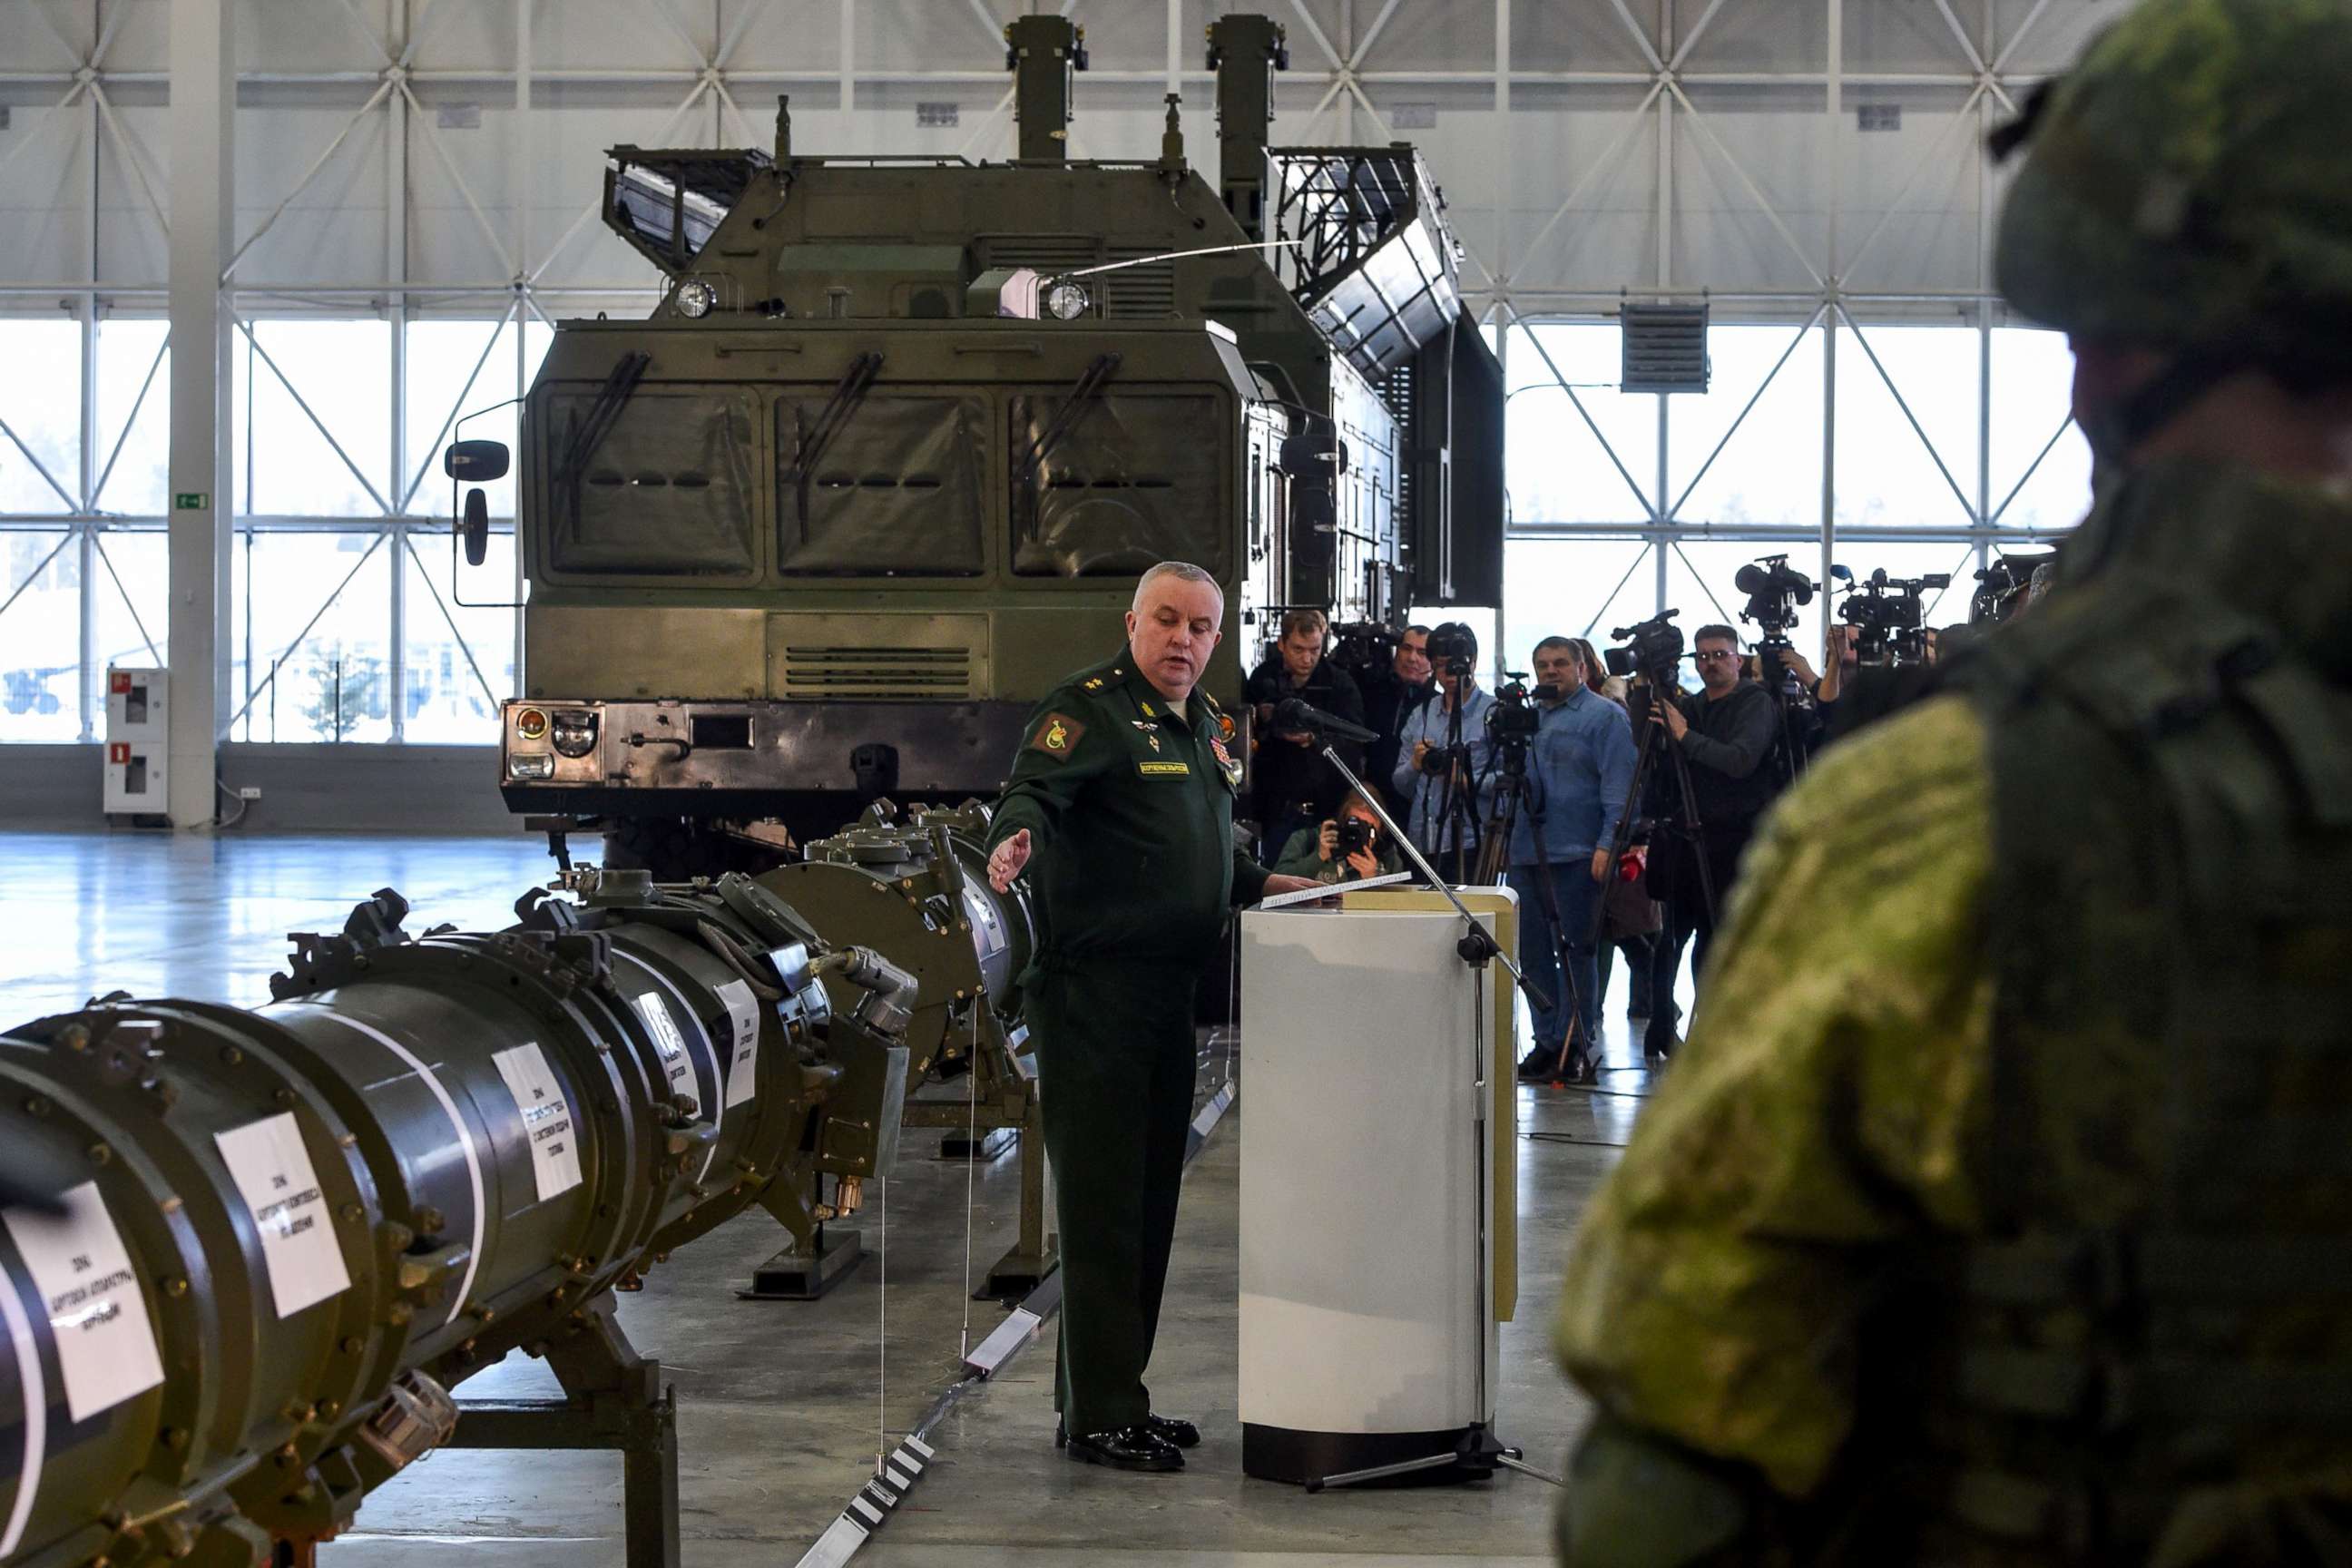 PHOTO: Russian Defence Ministry officials show off the new Russia's 9M729 missile at the military Patriot park outside Moscow, Jan. 23, 2019.